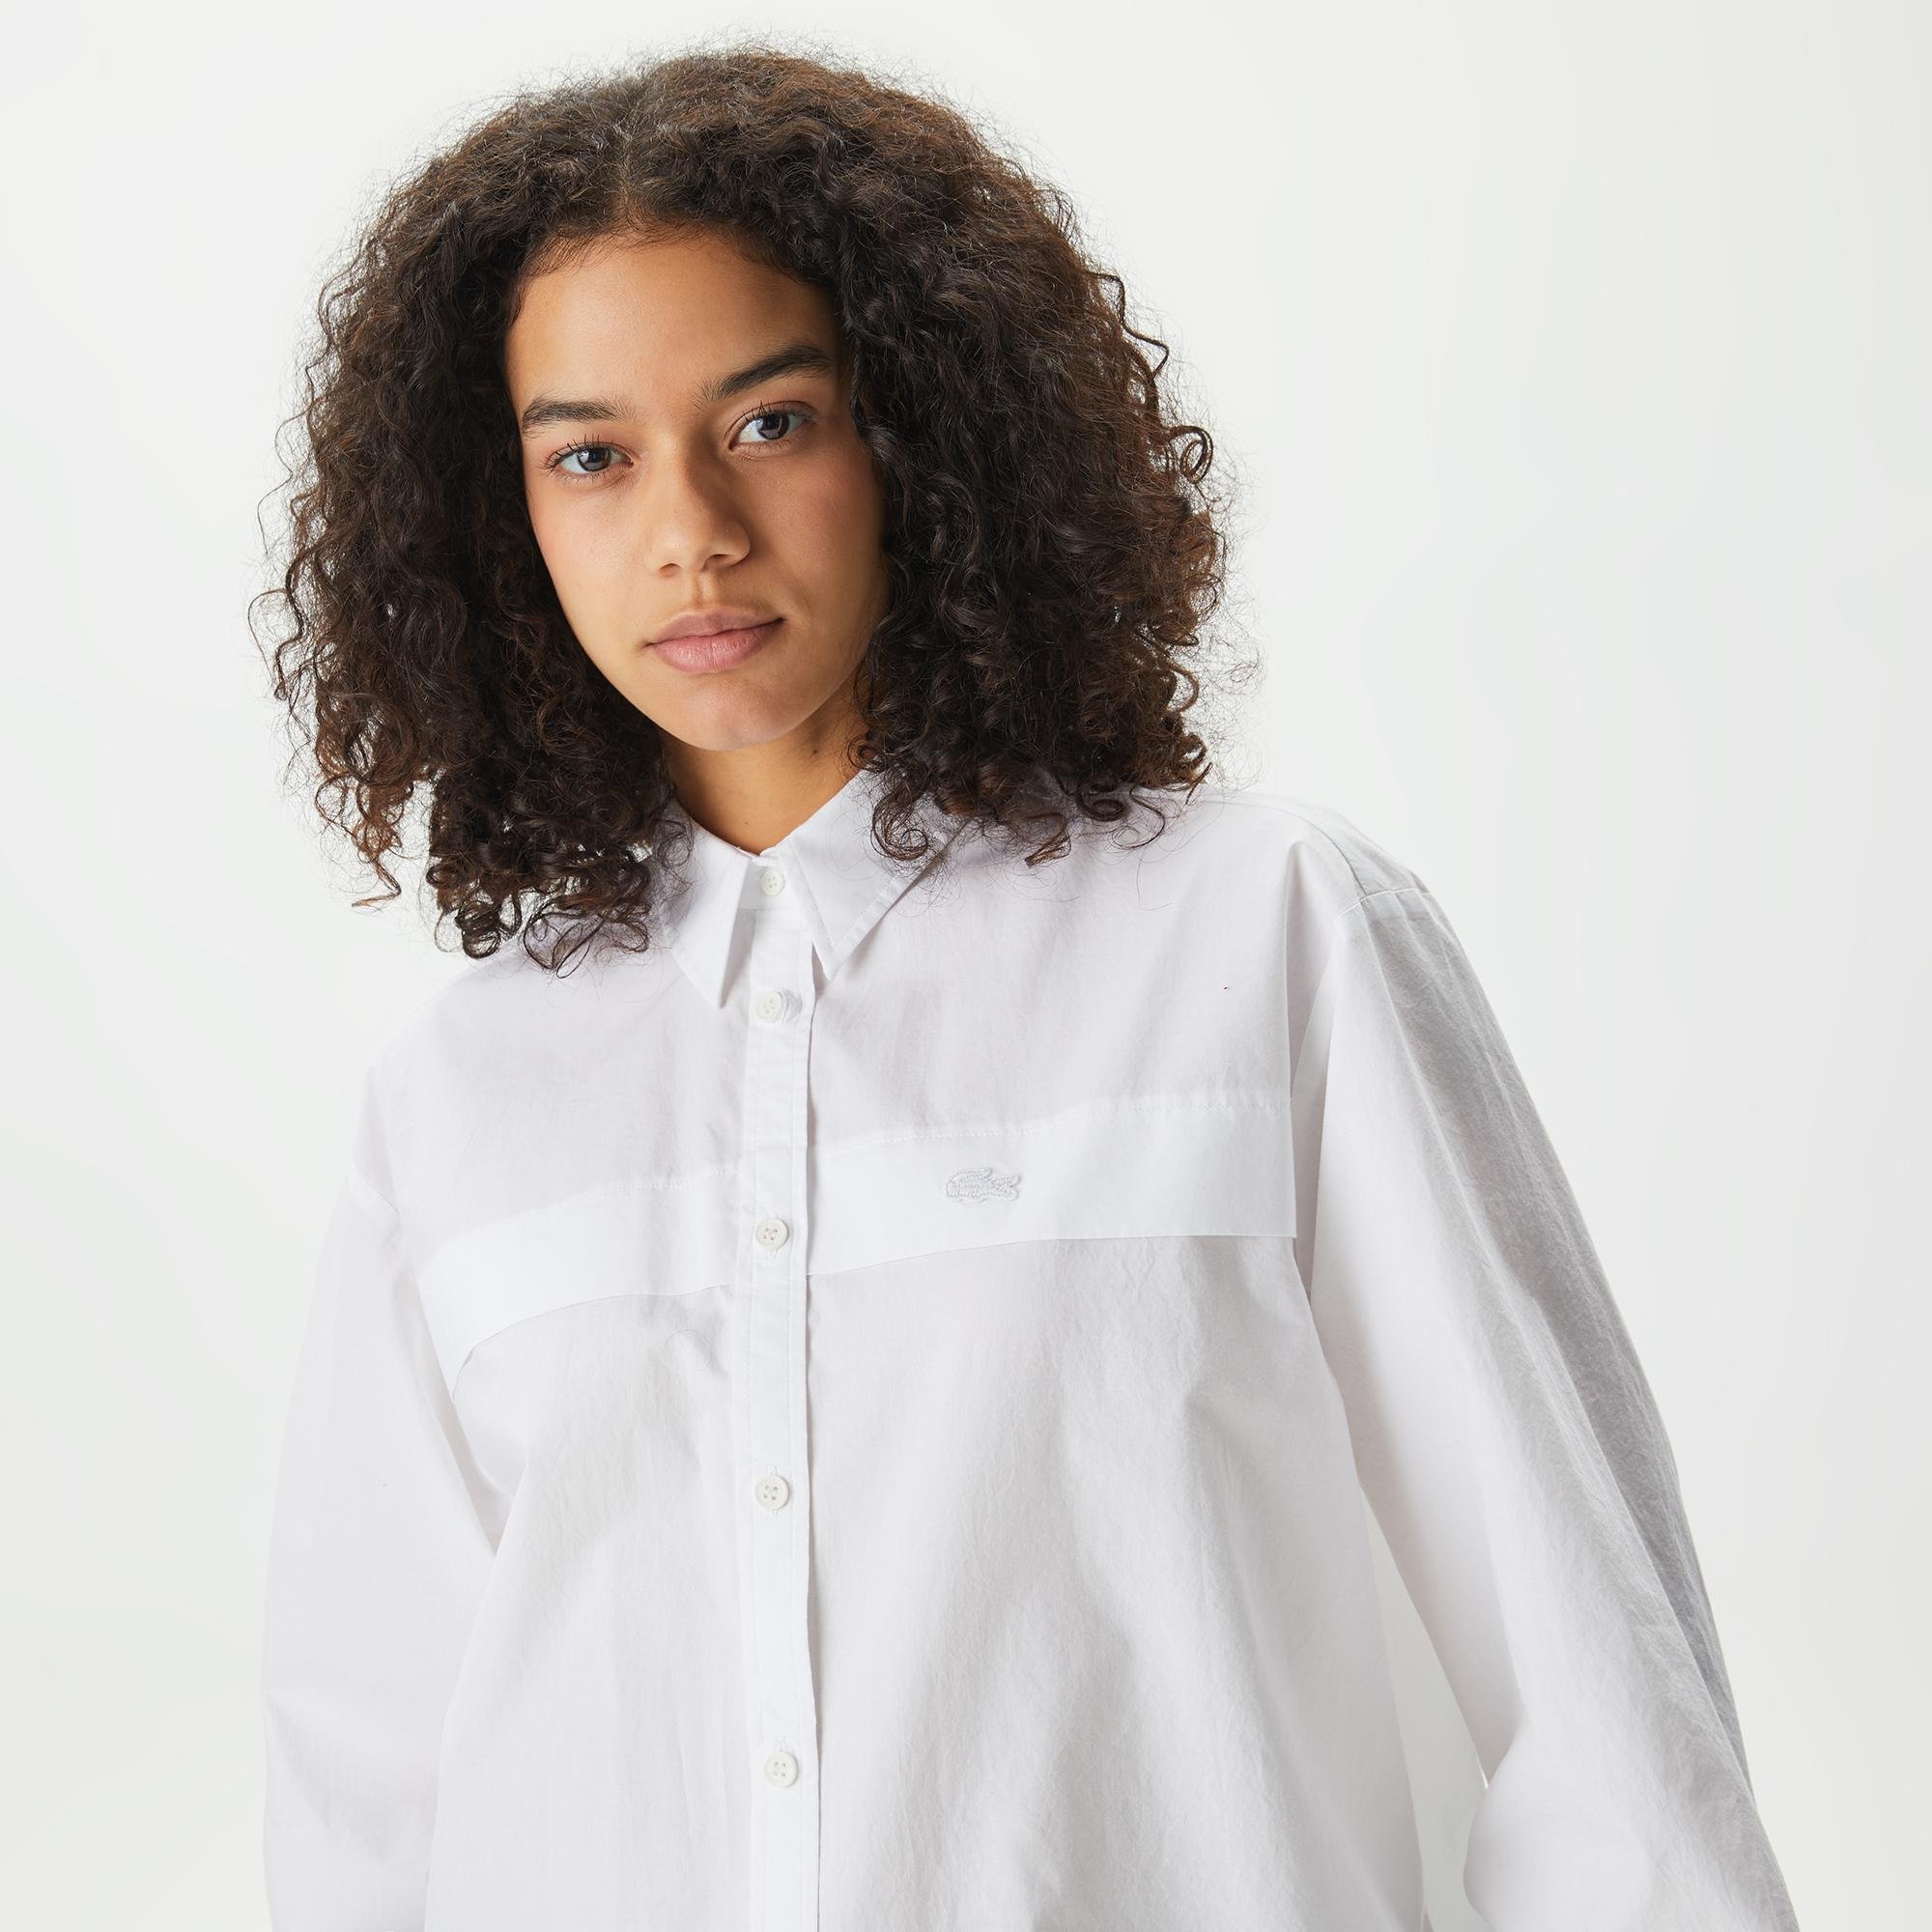 Lacoste Women's Relaxed Fit Shirt